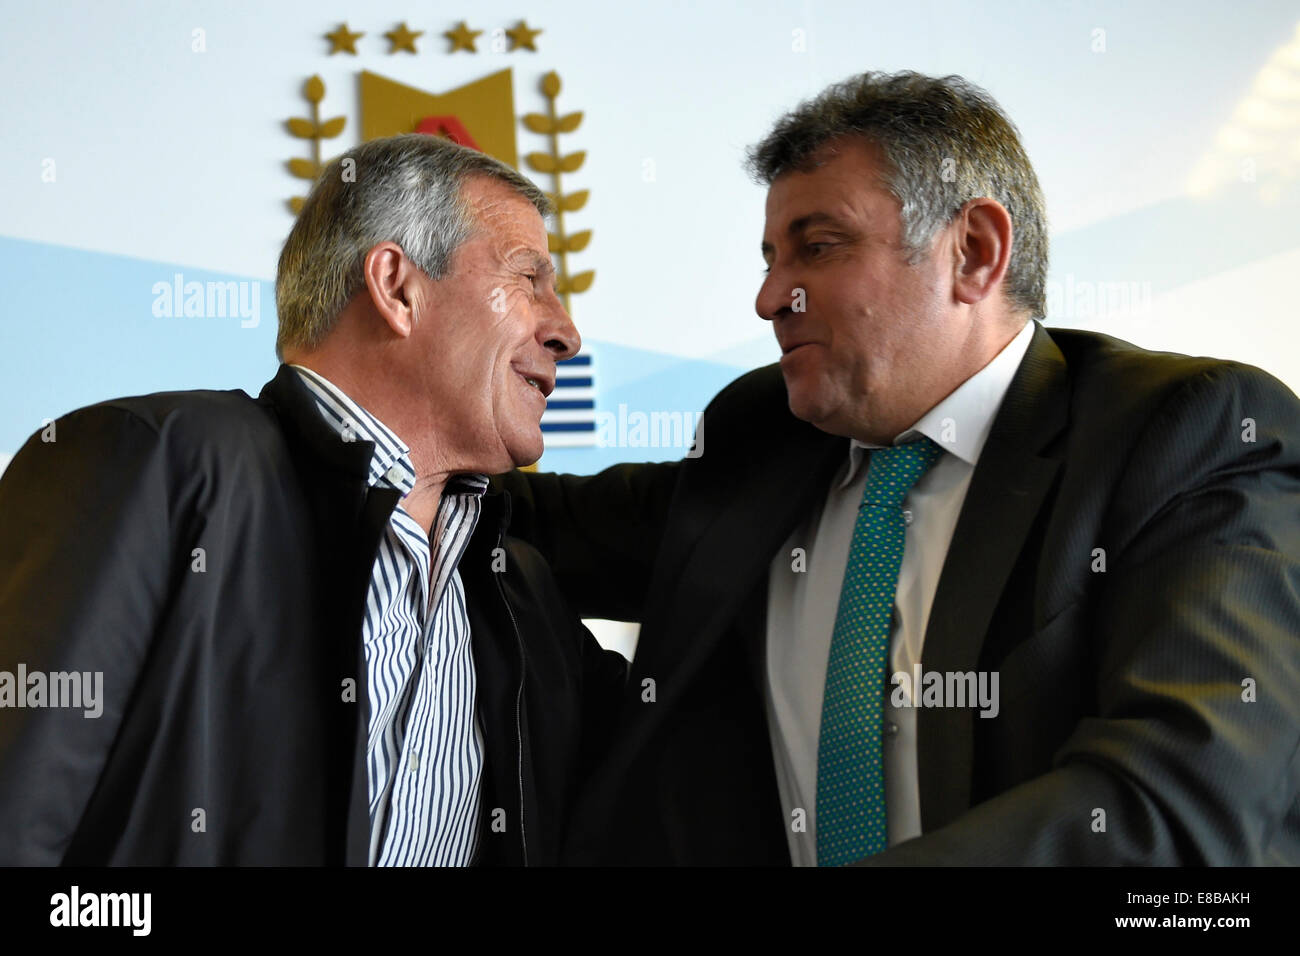 Montevideo, Uruguay. 3rd Oct, 2014. Uruguay's national soccer team head coach Oscar Washington Tabarez (L) and President of Uruguayan Football Association (AFU, for its acronym in Spanish) Wilmar Valdez attend a press conference held at the headquarters of AFU in Montevideo, capital of Uruguay, on Oct. 3, 2014. Tabarez renewed his contract with the AFU to lead the Uruguayan national soccer team until 2018 World Cup Russia. © Nicolas Celaya/Xinhua/Alamy Live News Stock Photo